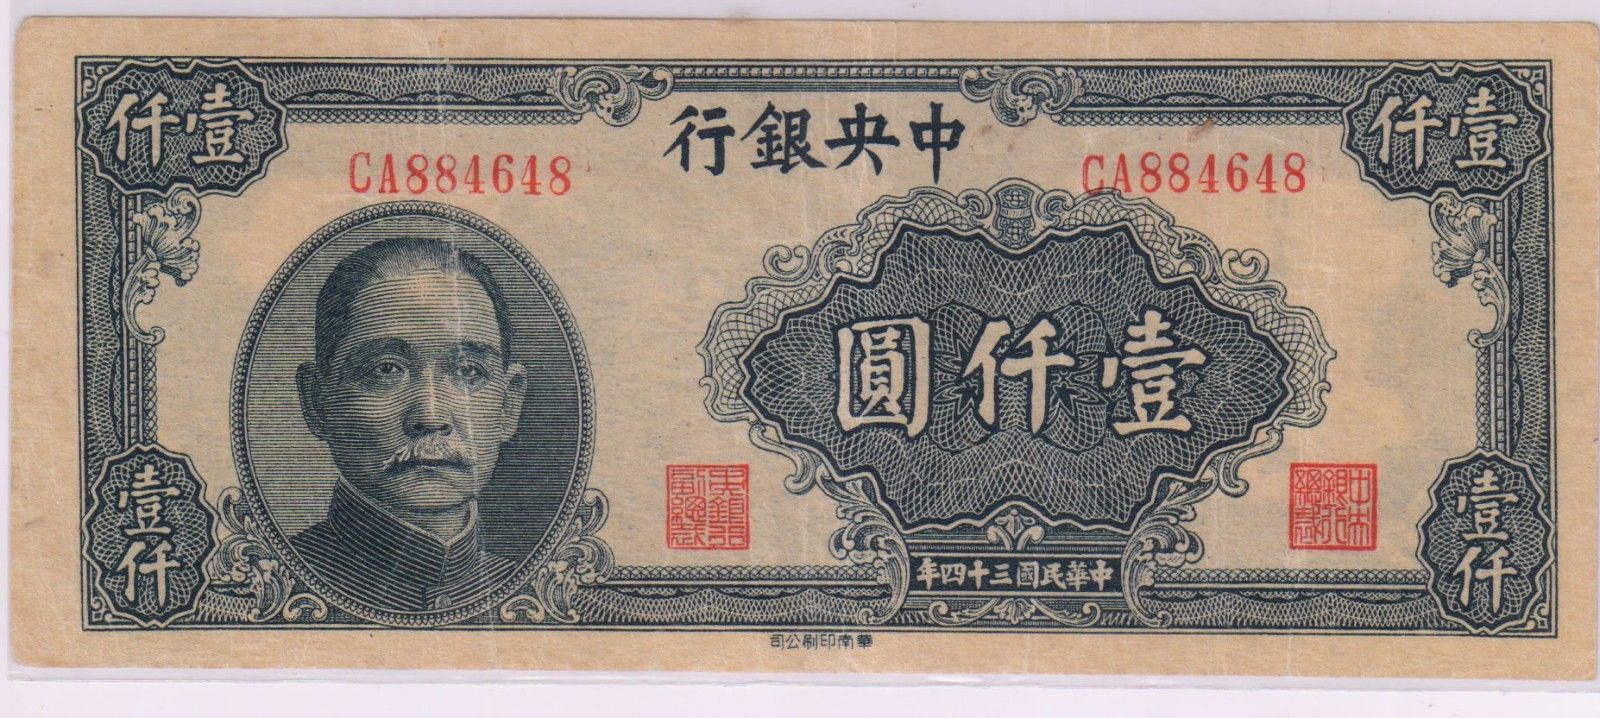 China 1000 Yuan Currency Note Kb Coins Currencies - china 1000 yuan currency note